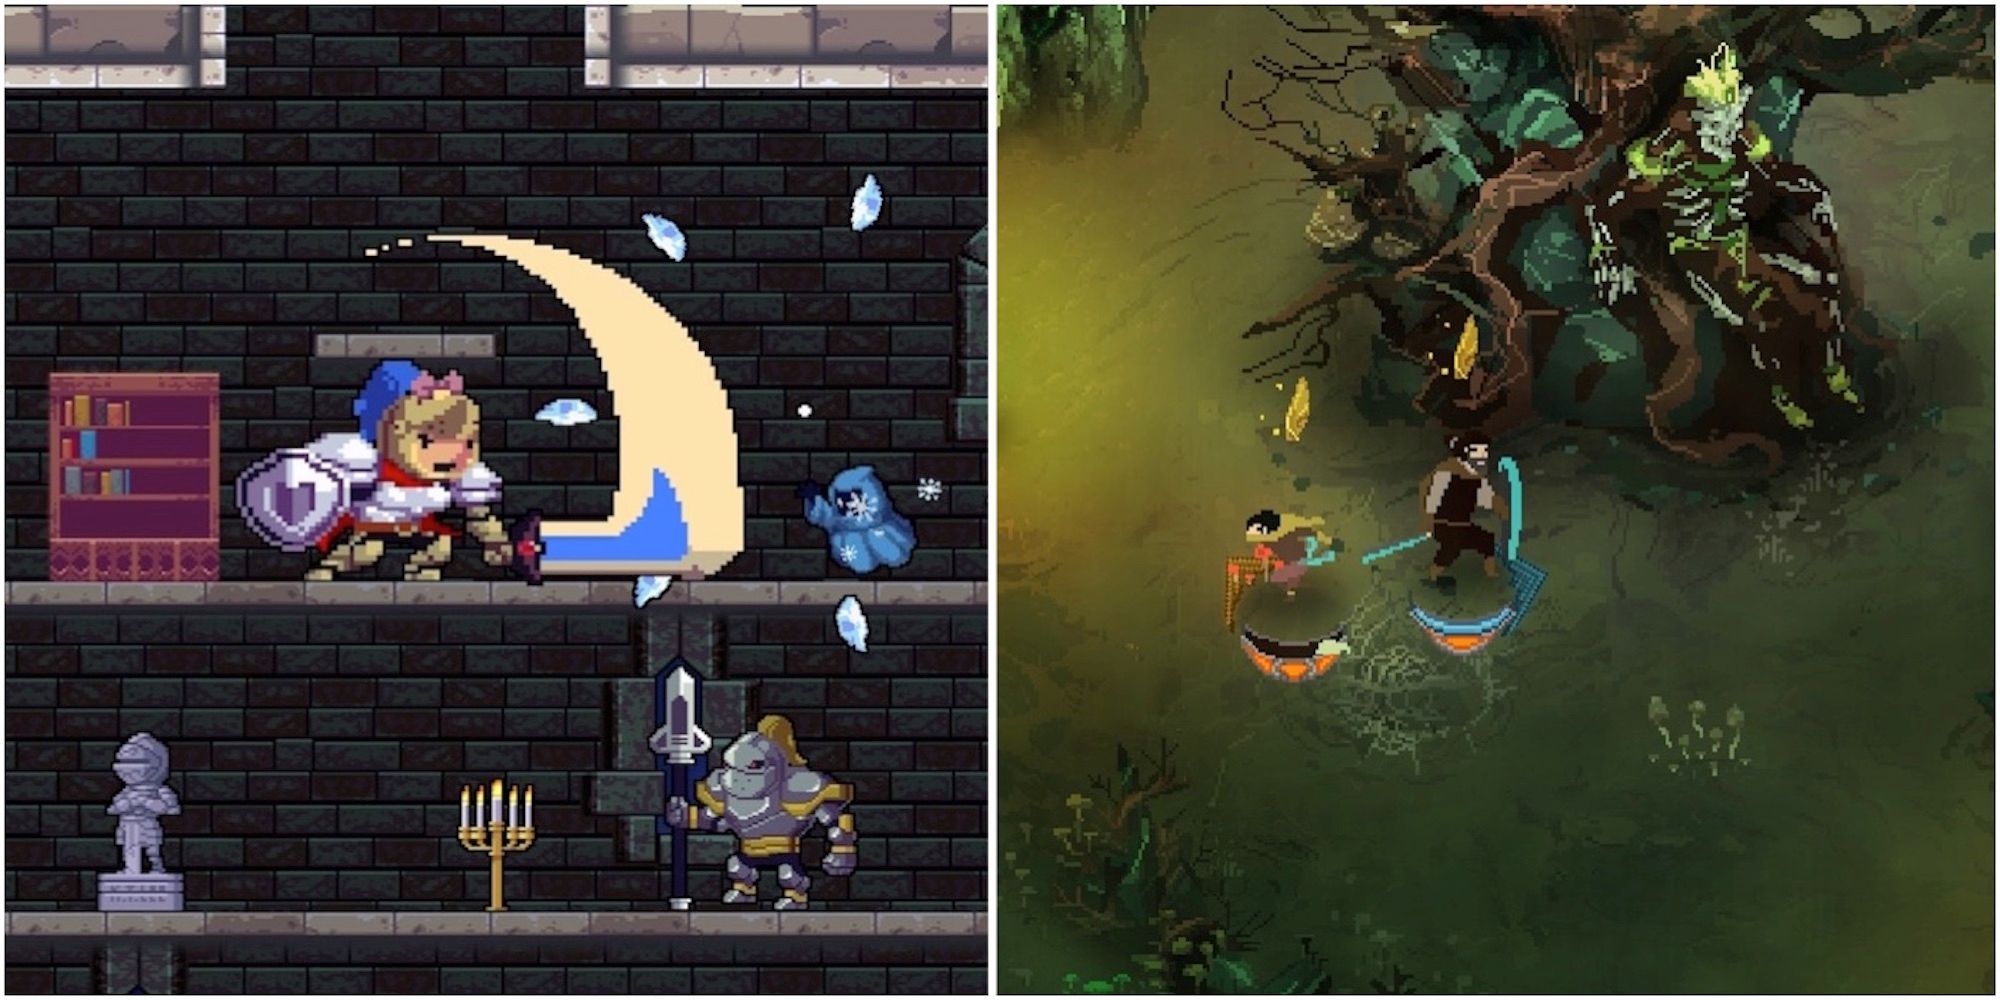 Fighting enemies in Rogue Legacy and Children Of Morta